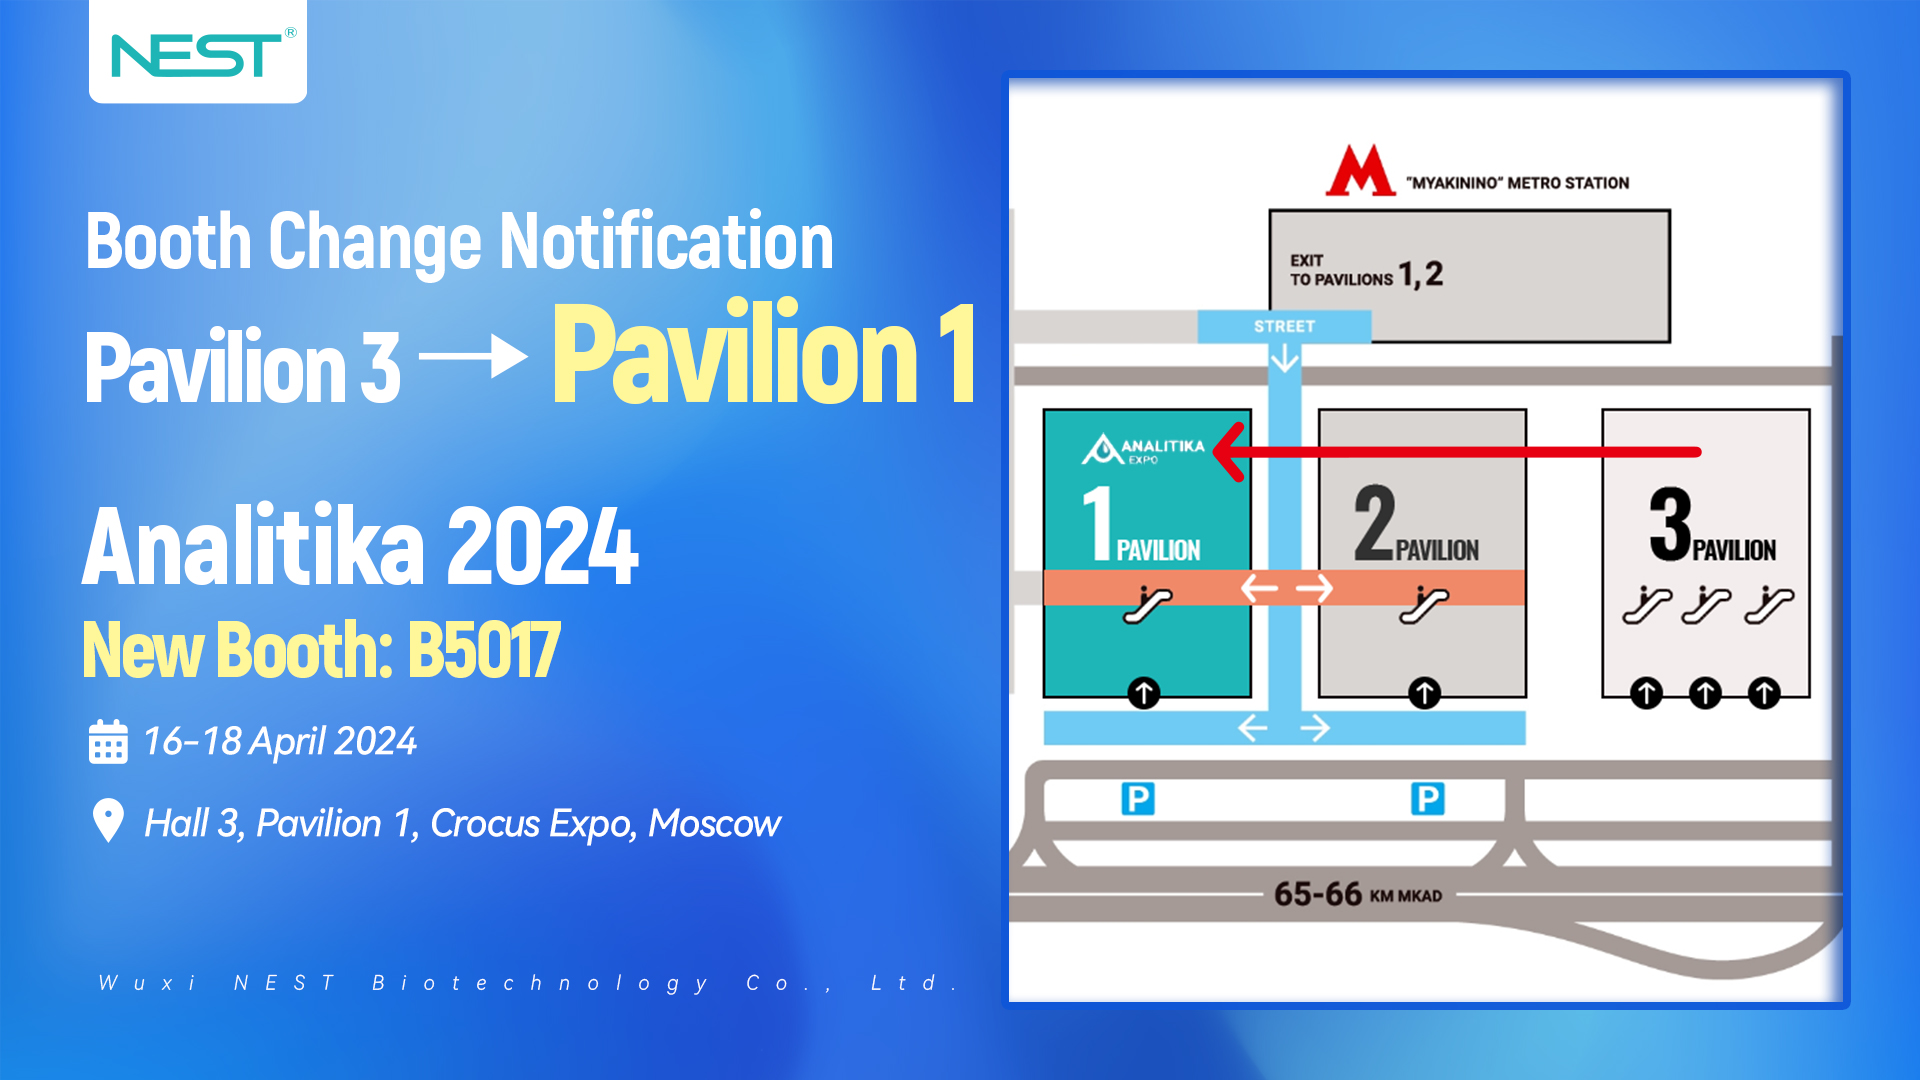 Notification of NEST's Booth Change in Analitika 2024